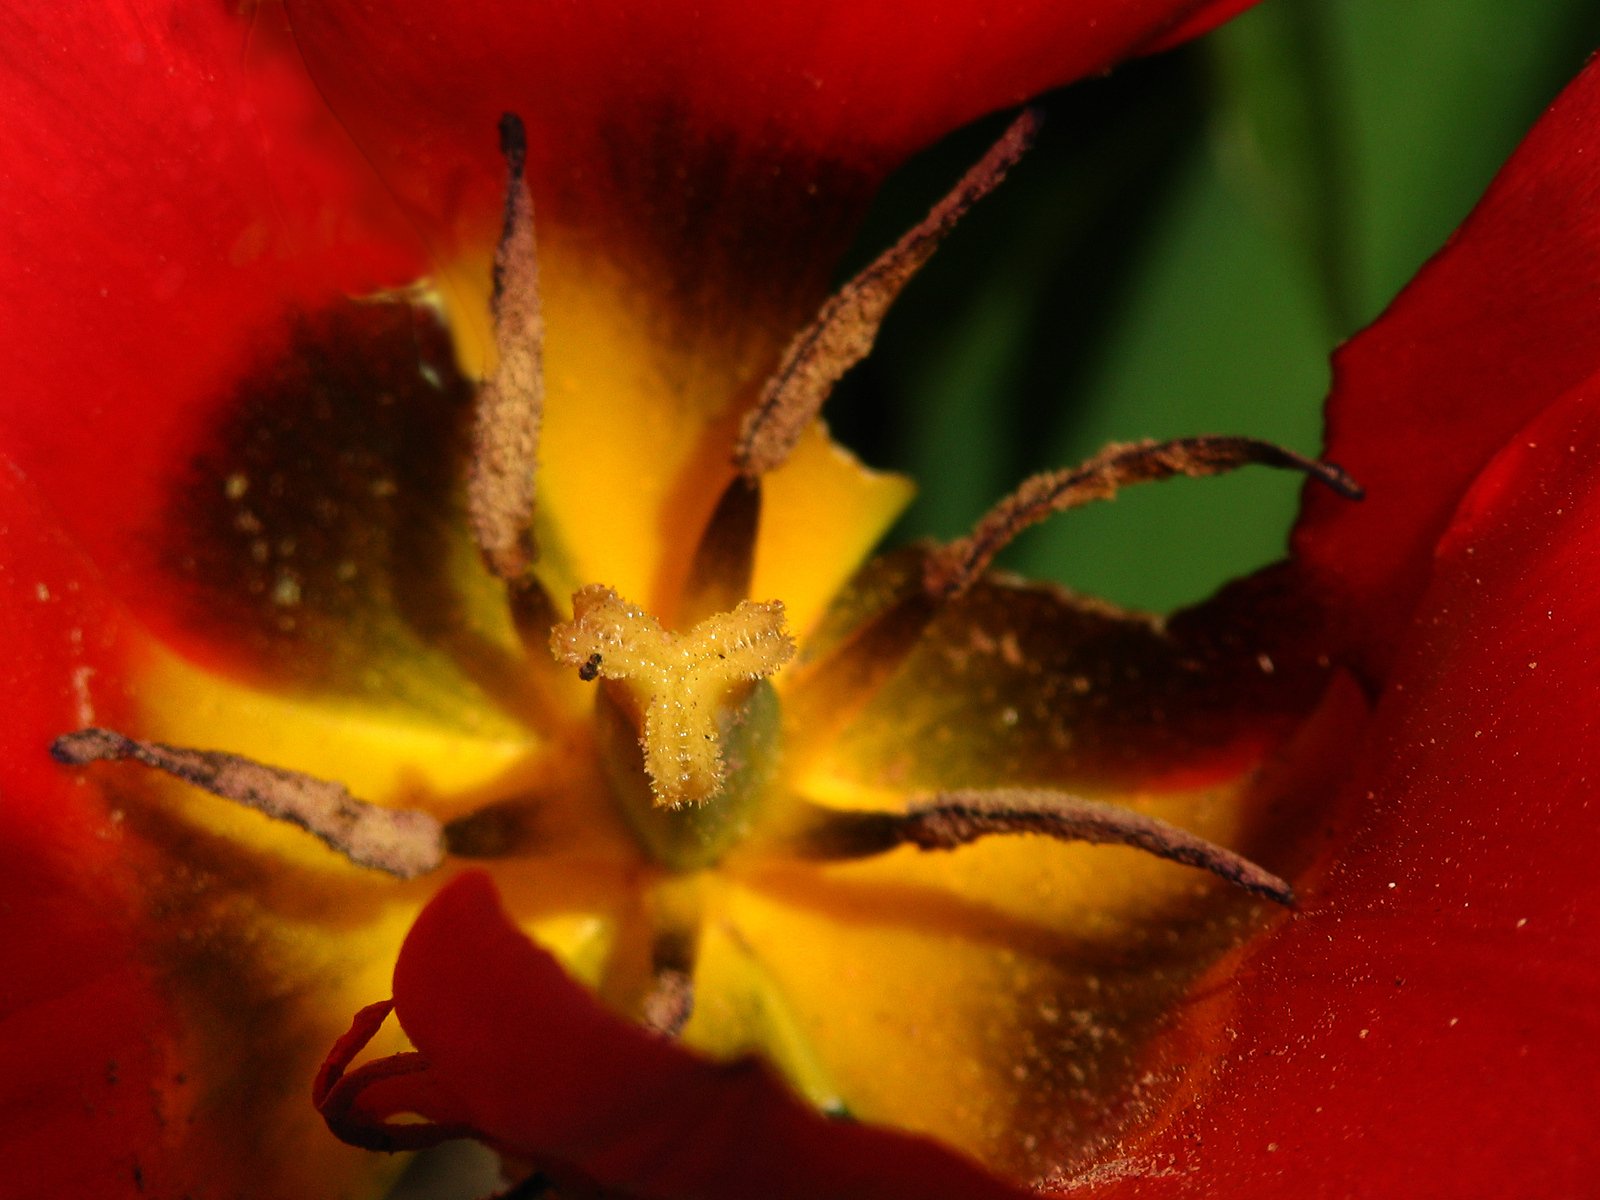 there is a very big red and yellow tulip